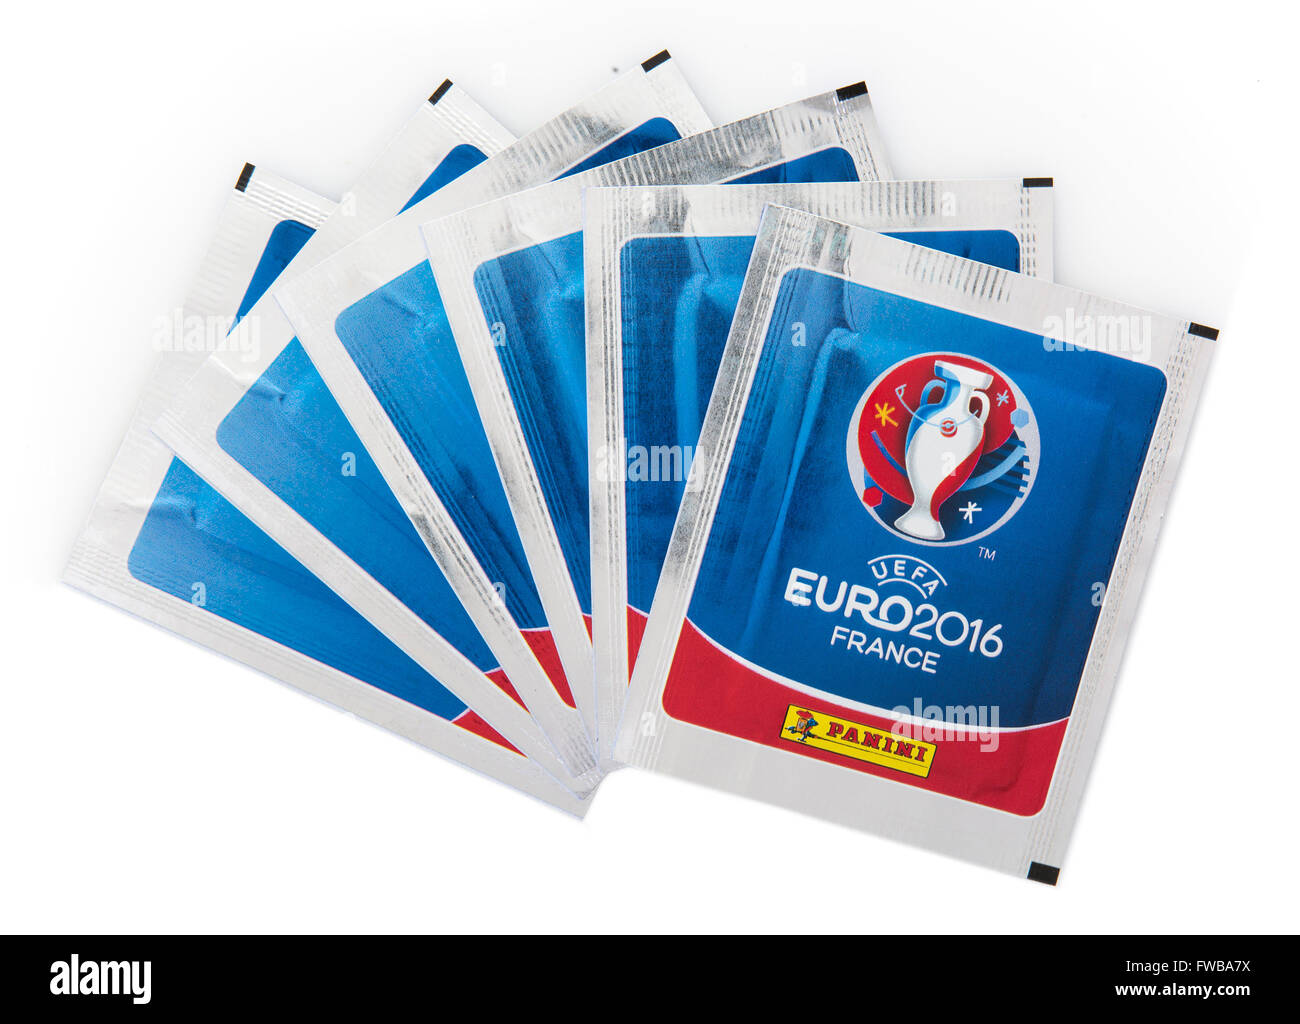 Panini Euro 2016 France Sticker Collection and Album on a white background  Stock Photo - Alamy